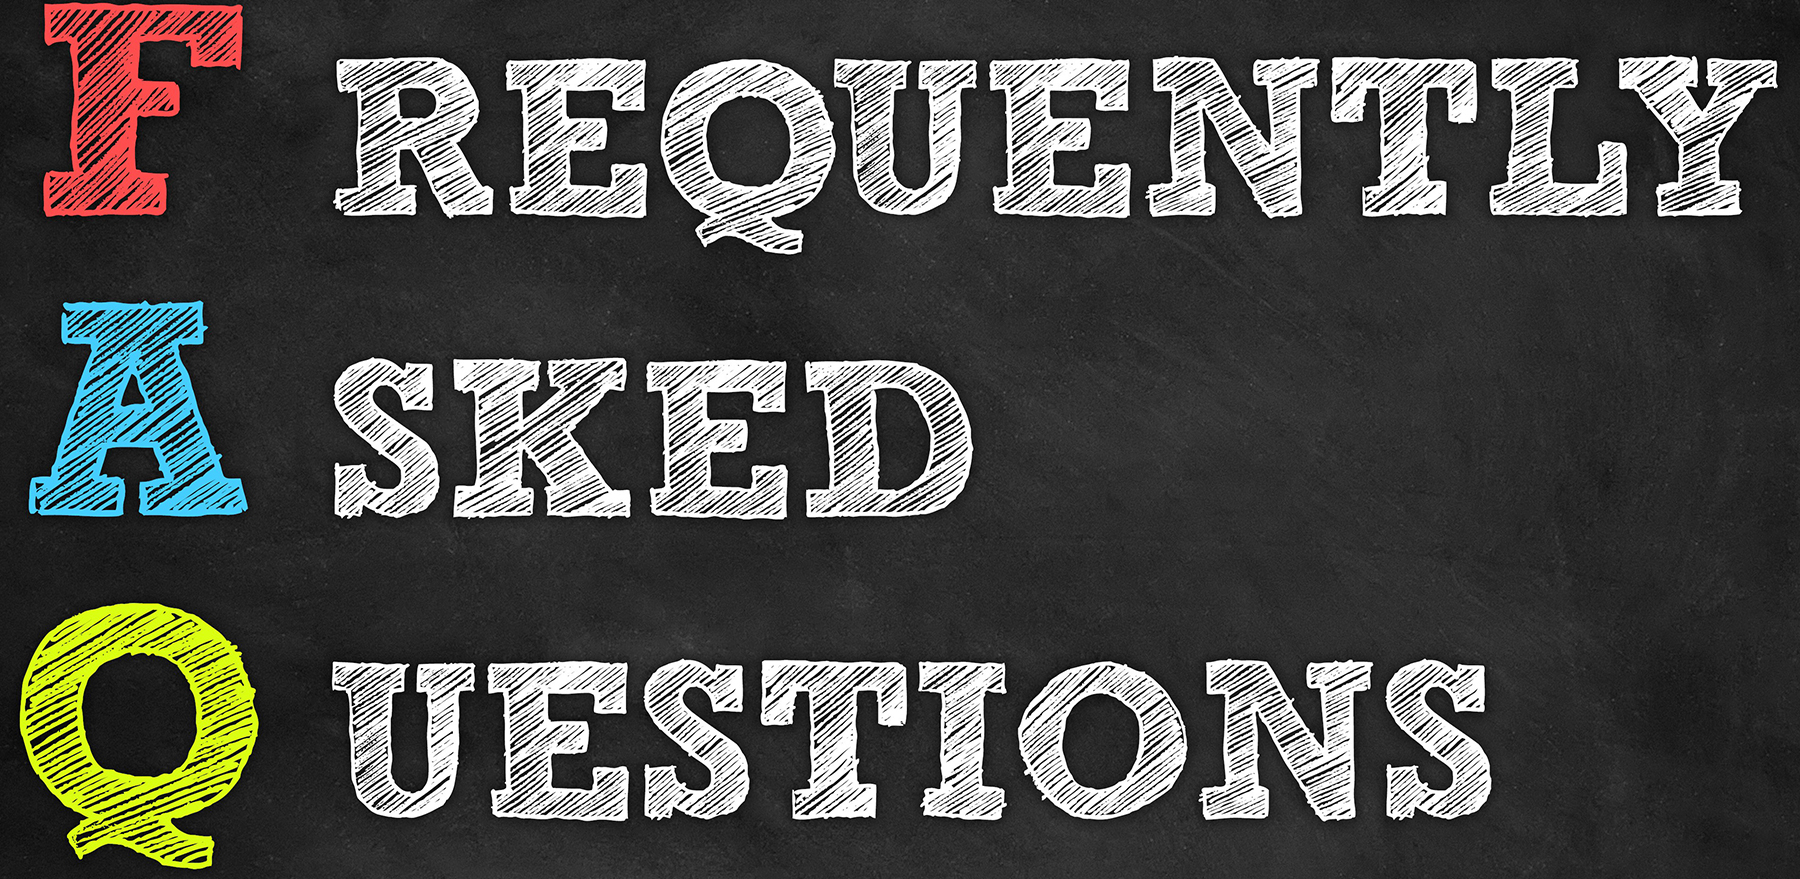 Frequently Asked Questions written on chalkboard